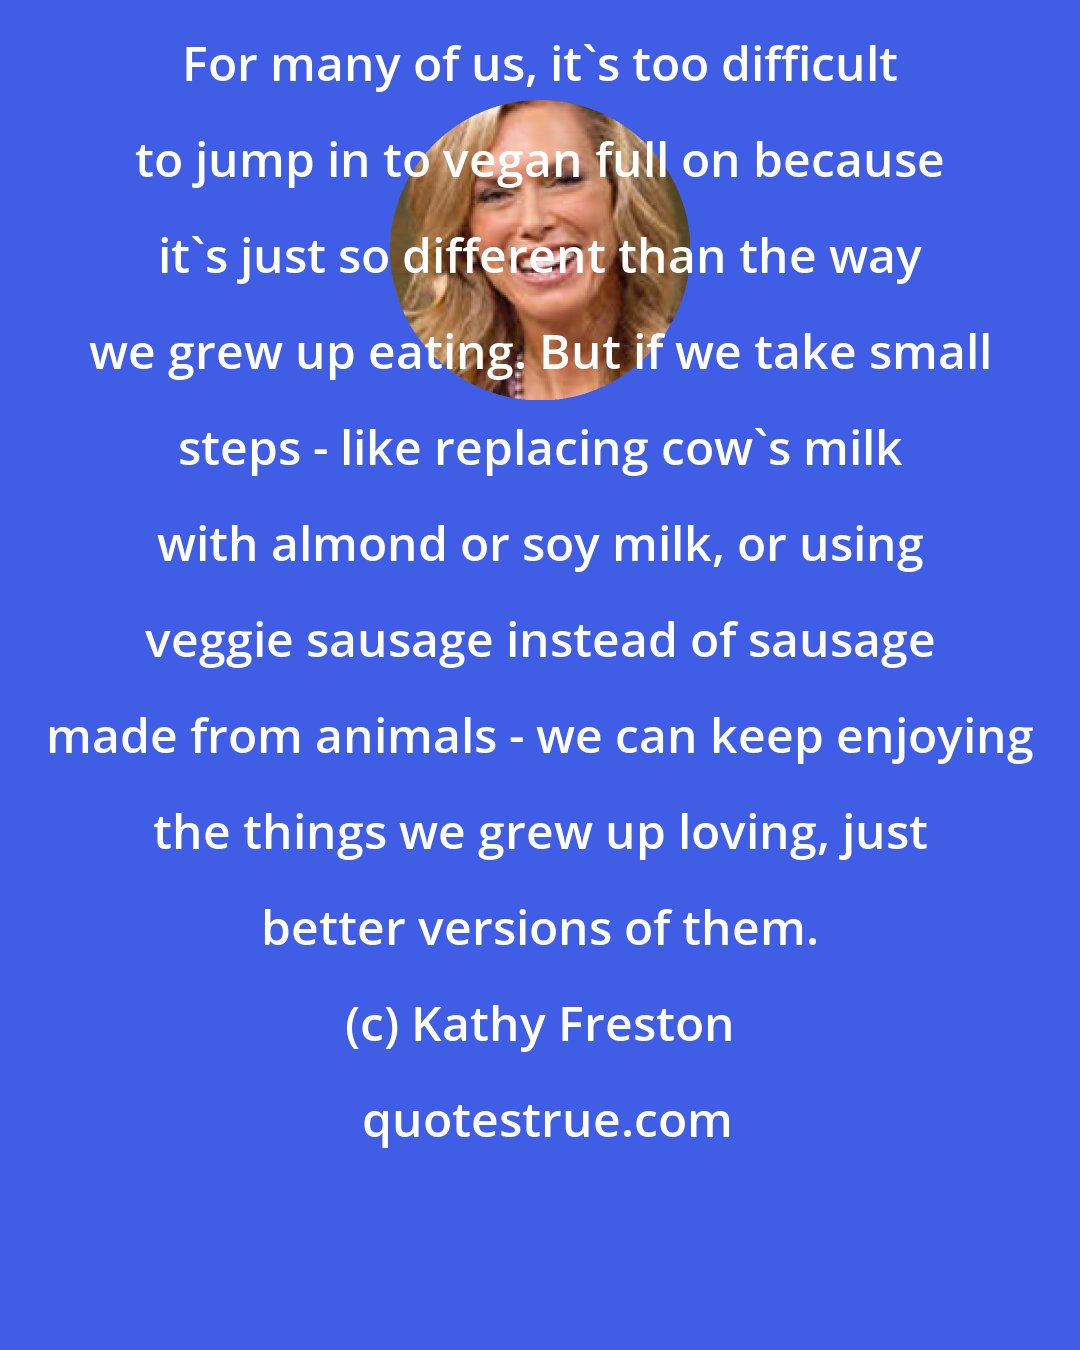 Kathy Freston: For many of us, it's too difficult to jump in to vegan full on because it's just so different than the way we grew up eating. But if we take small steps - like replacing cow's milk with almond or soy milk, or using veggie sausage instead of sausage made from animals - we can keep enjoying the things we grew up loving, just better versions of them.